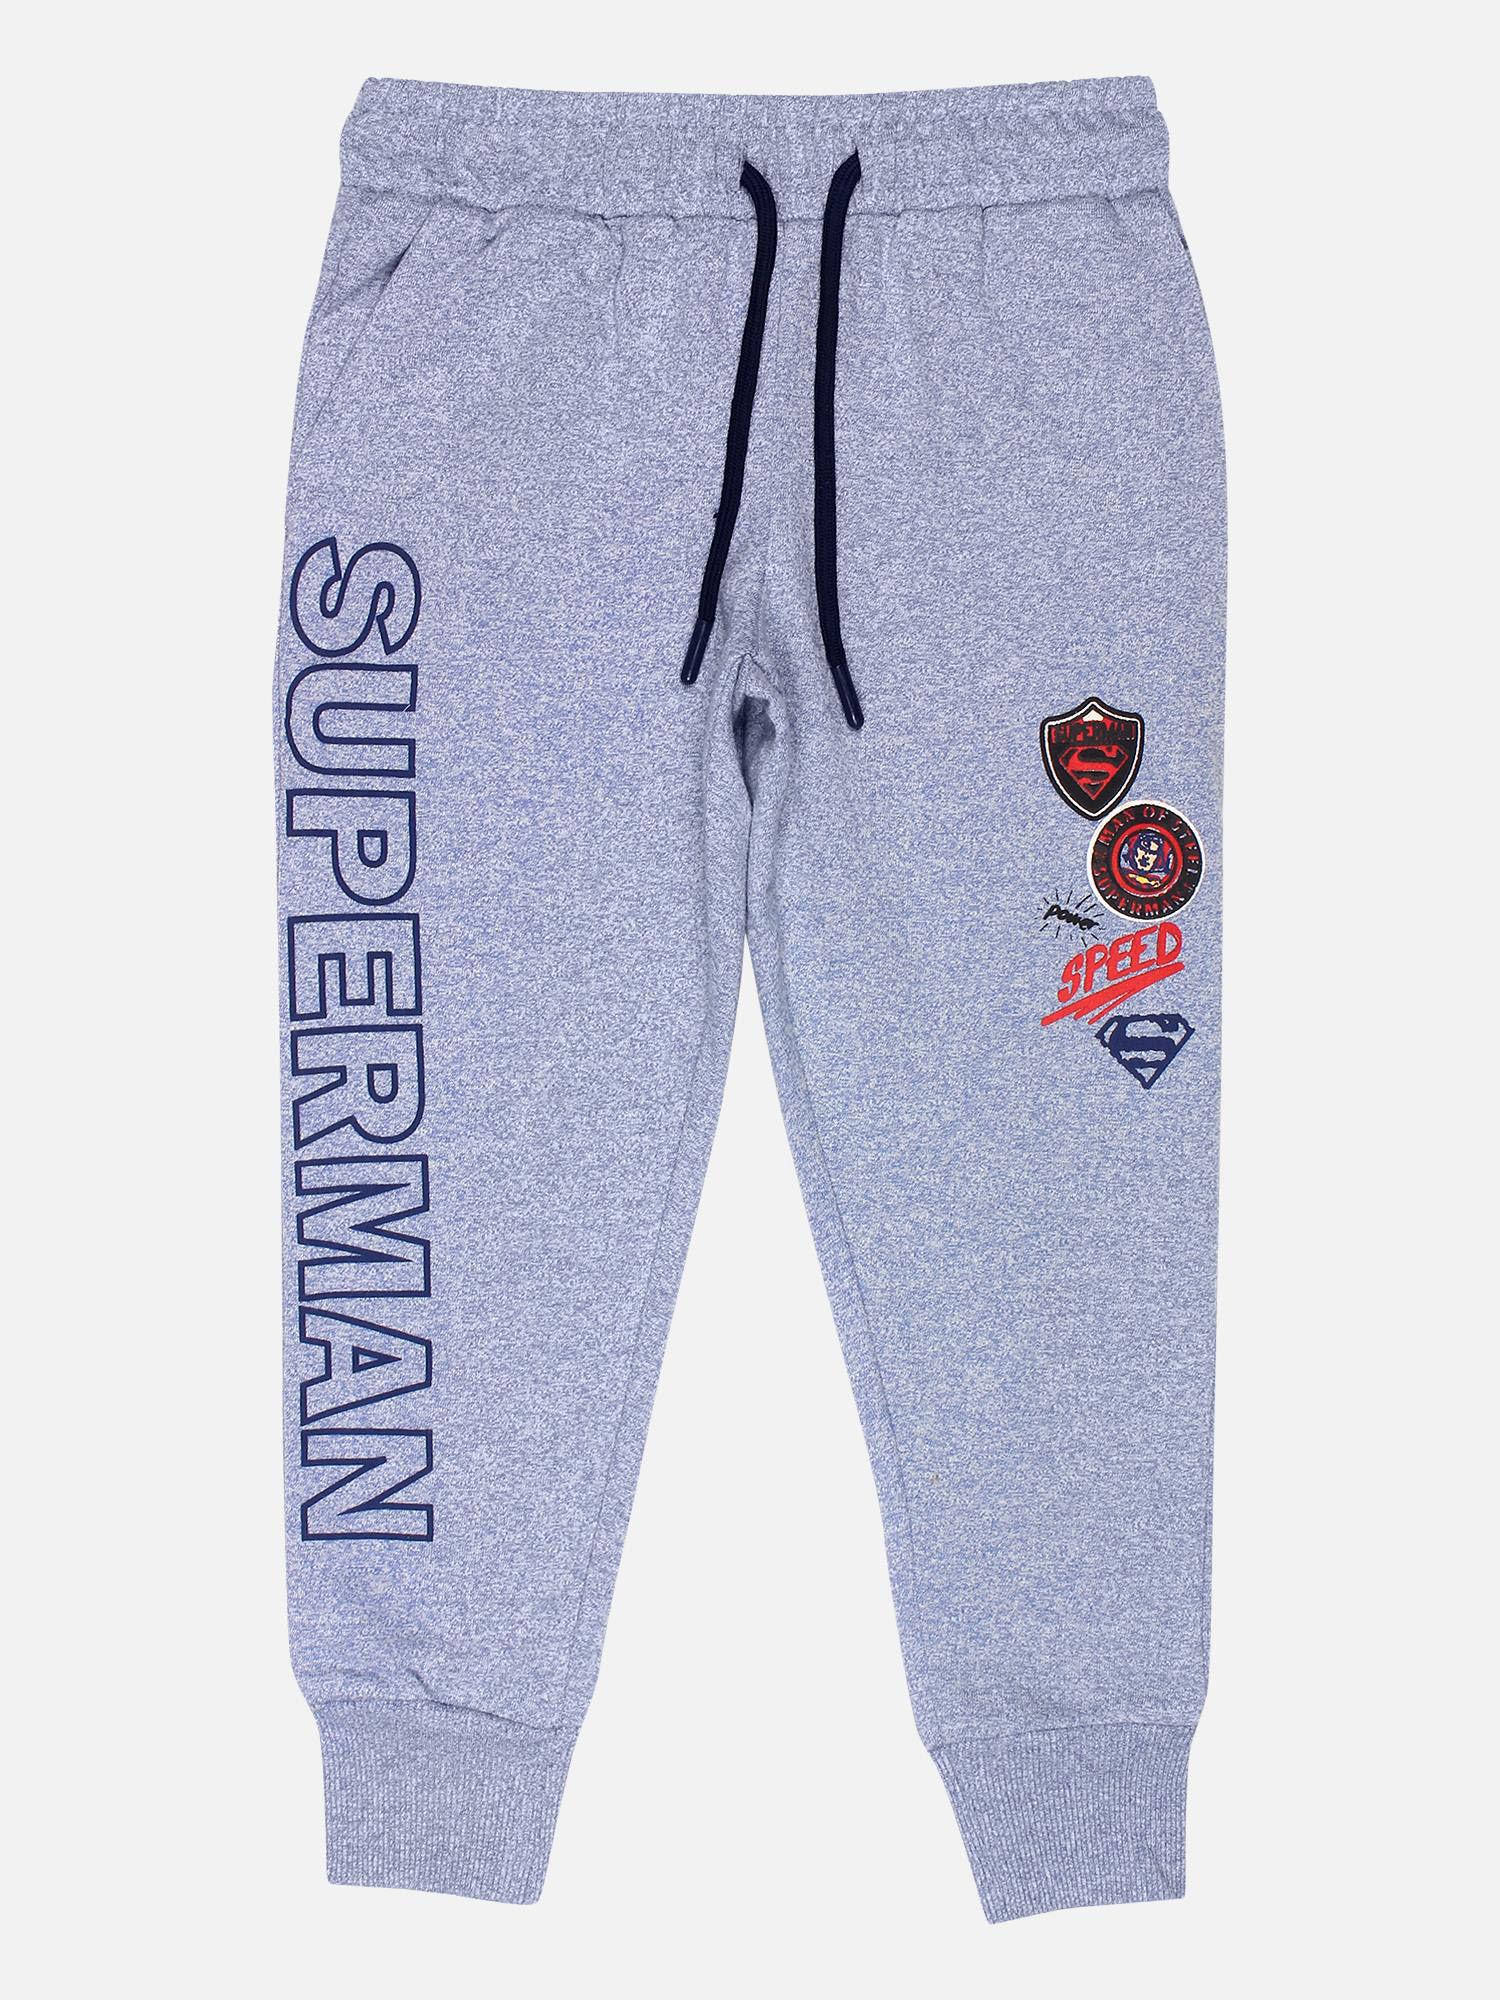 superman featured blue joggers for boys